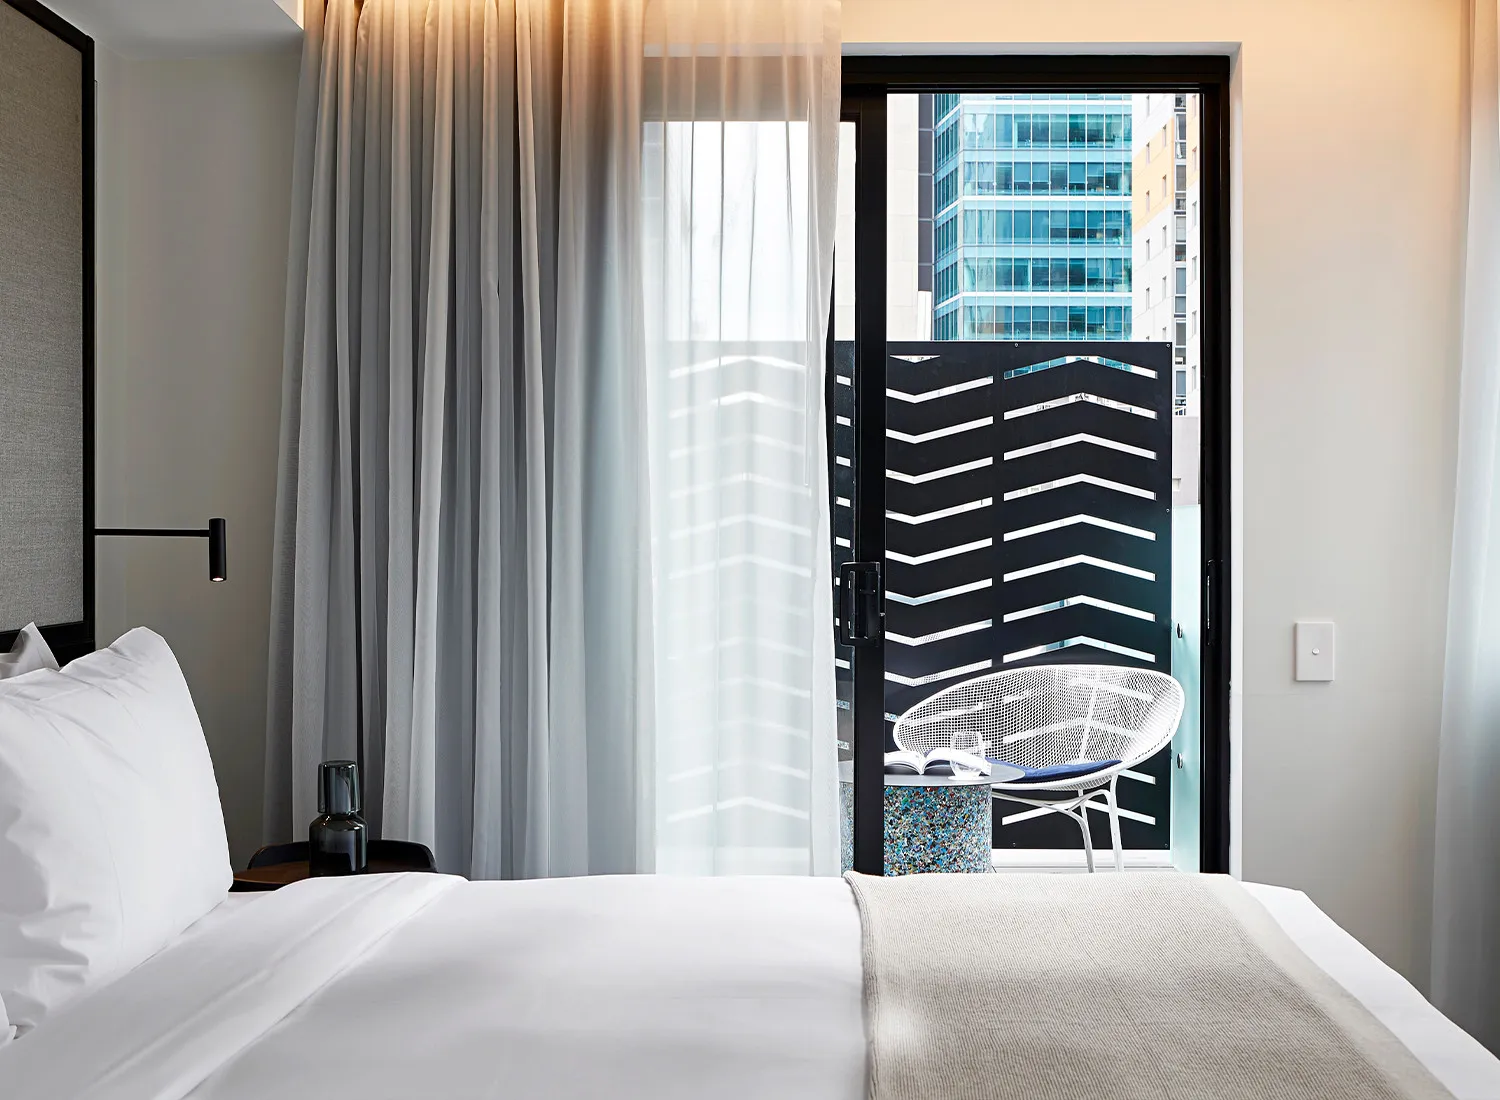 Lancemore Crossley st Boutique Luxury Accommodations Melbourne One Bedroom Terrace Suite 1500 x 1100 v2